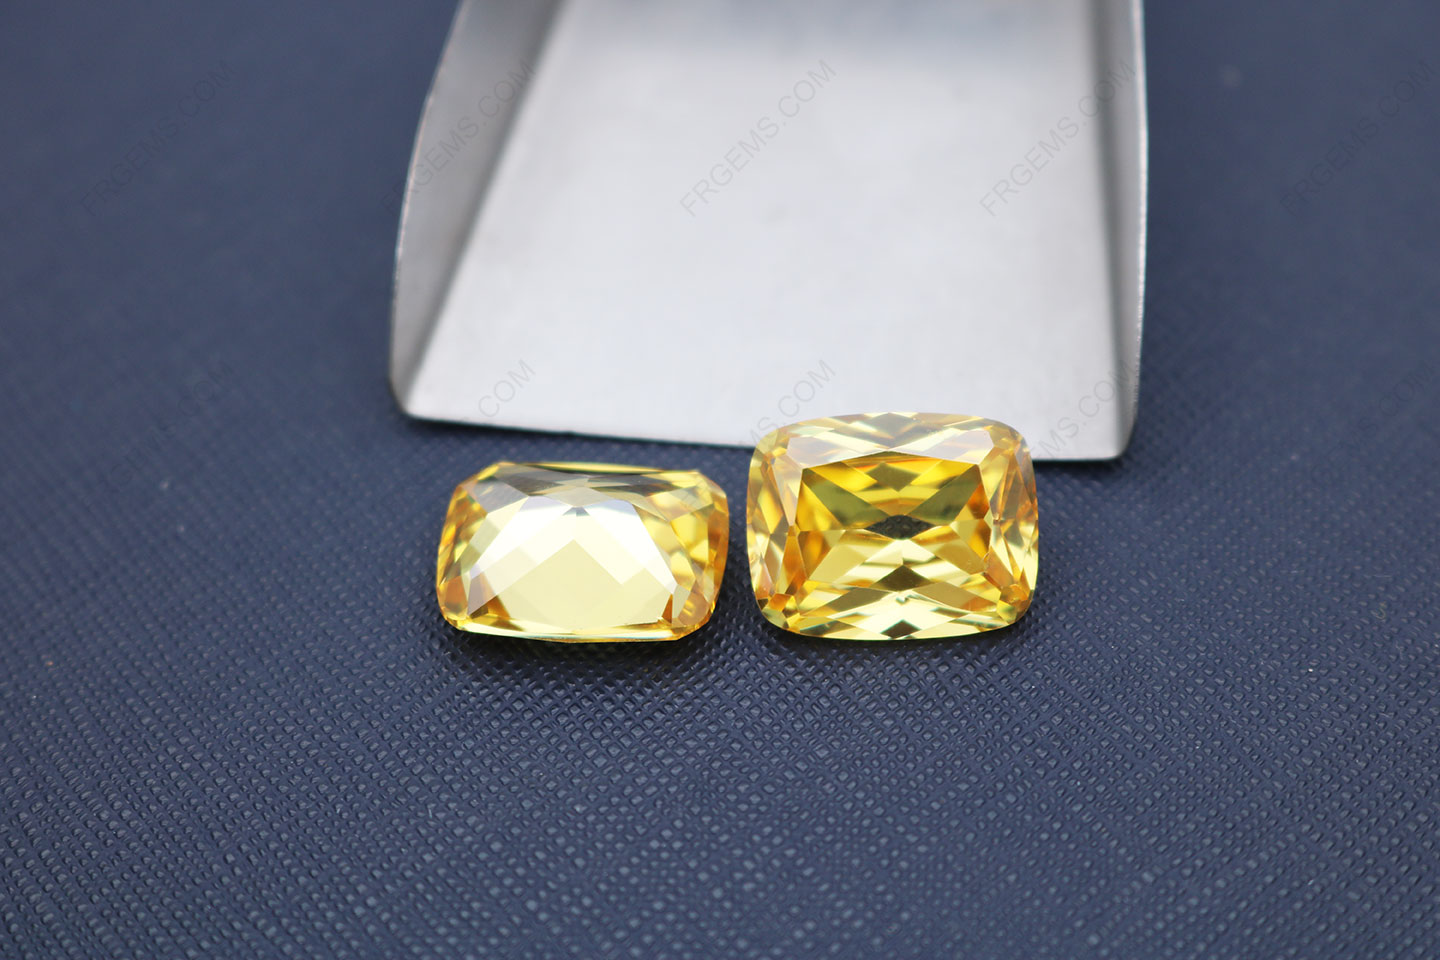 Elongated Cushion Shape Loose Cubic Zirconia Canary Yellow Color Faceted Princess Cut 18x14mm gemstones